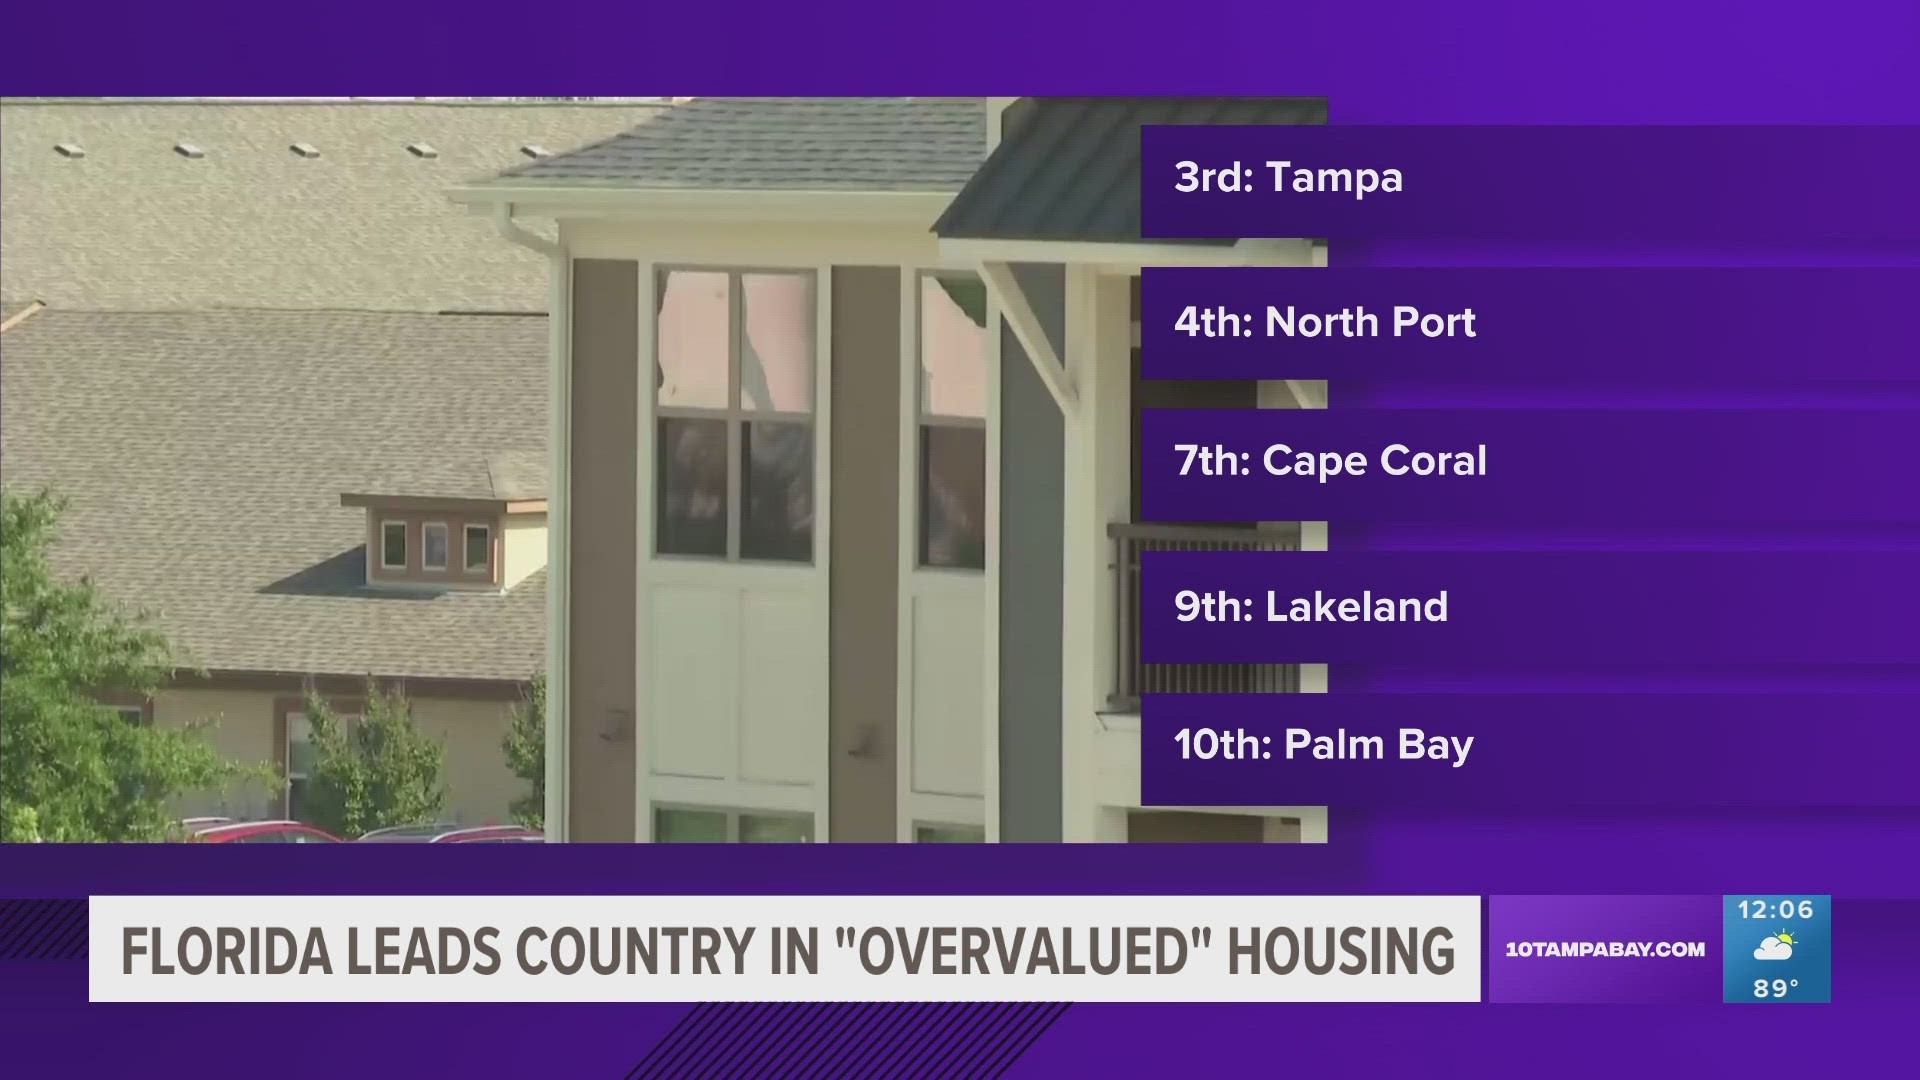 Florida has nine of the Top 15 most overvalued housing markets in the U.S.